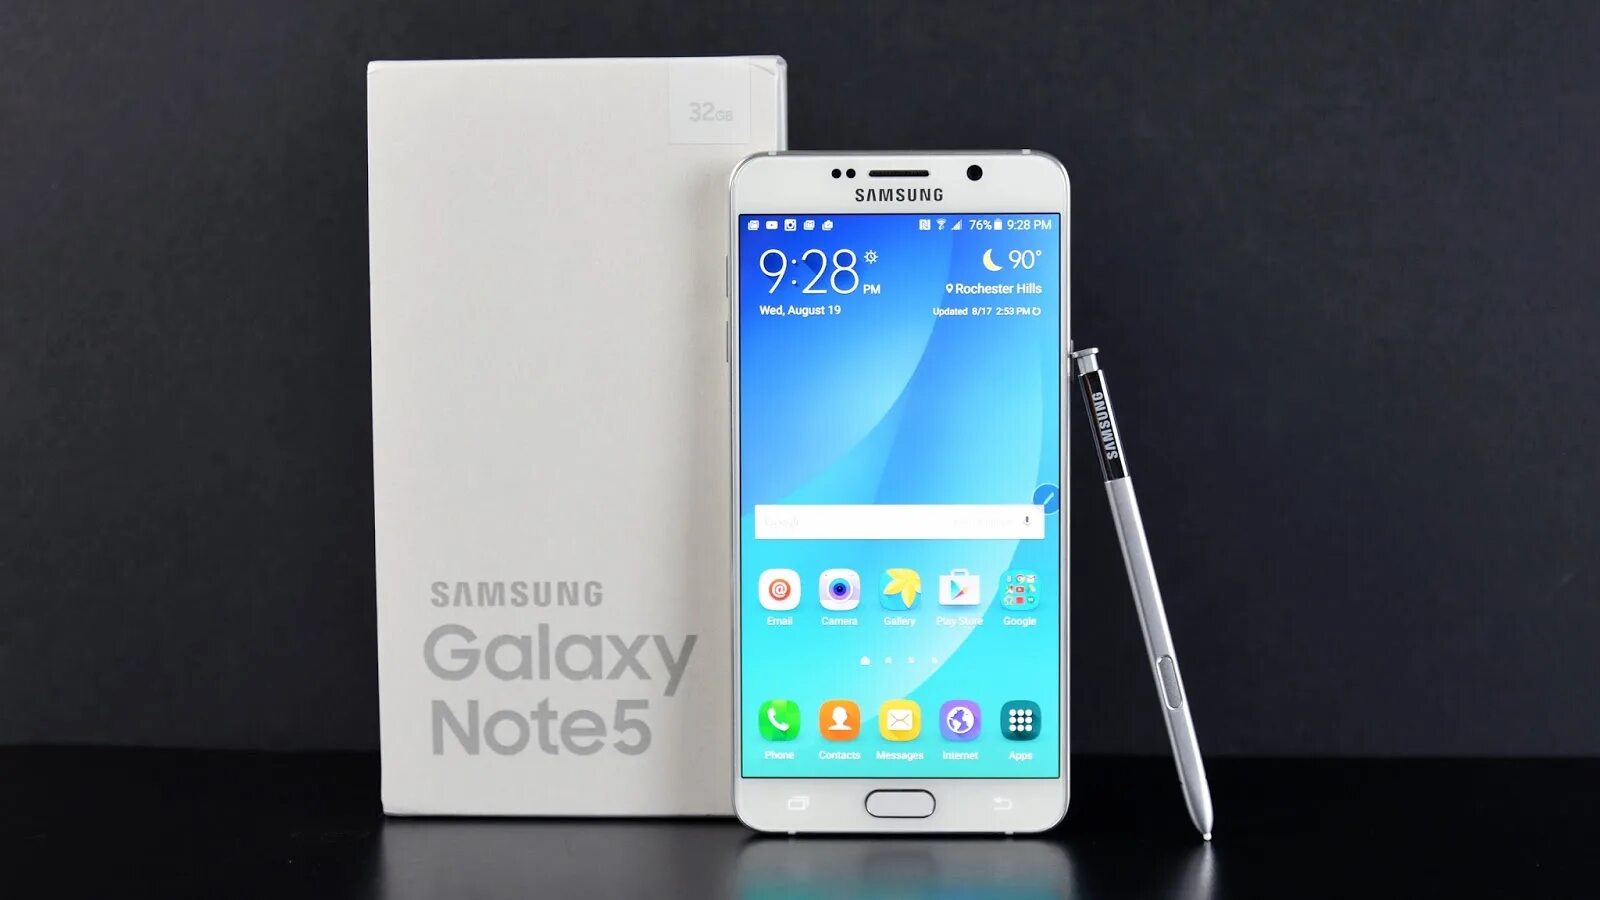 Galaxy Note 5. Самсунг галакси ноут 5. Самсунг галакси Note 6. Samsung Galaxy Note 5 32gb. Samsung note 24